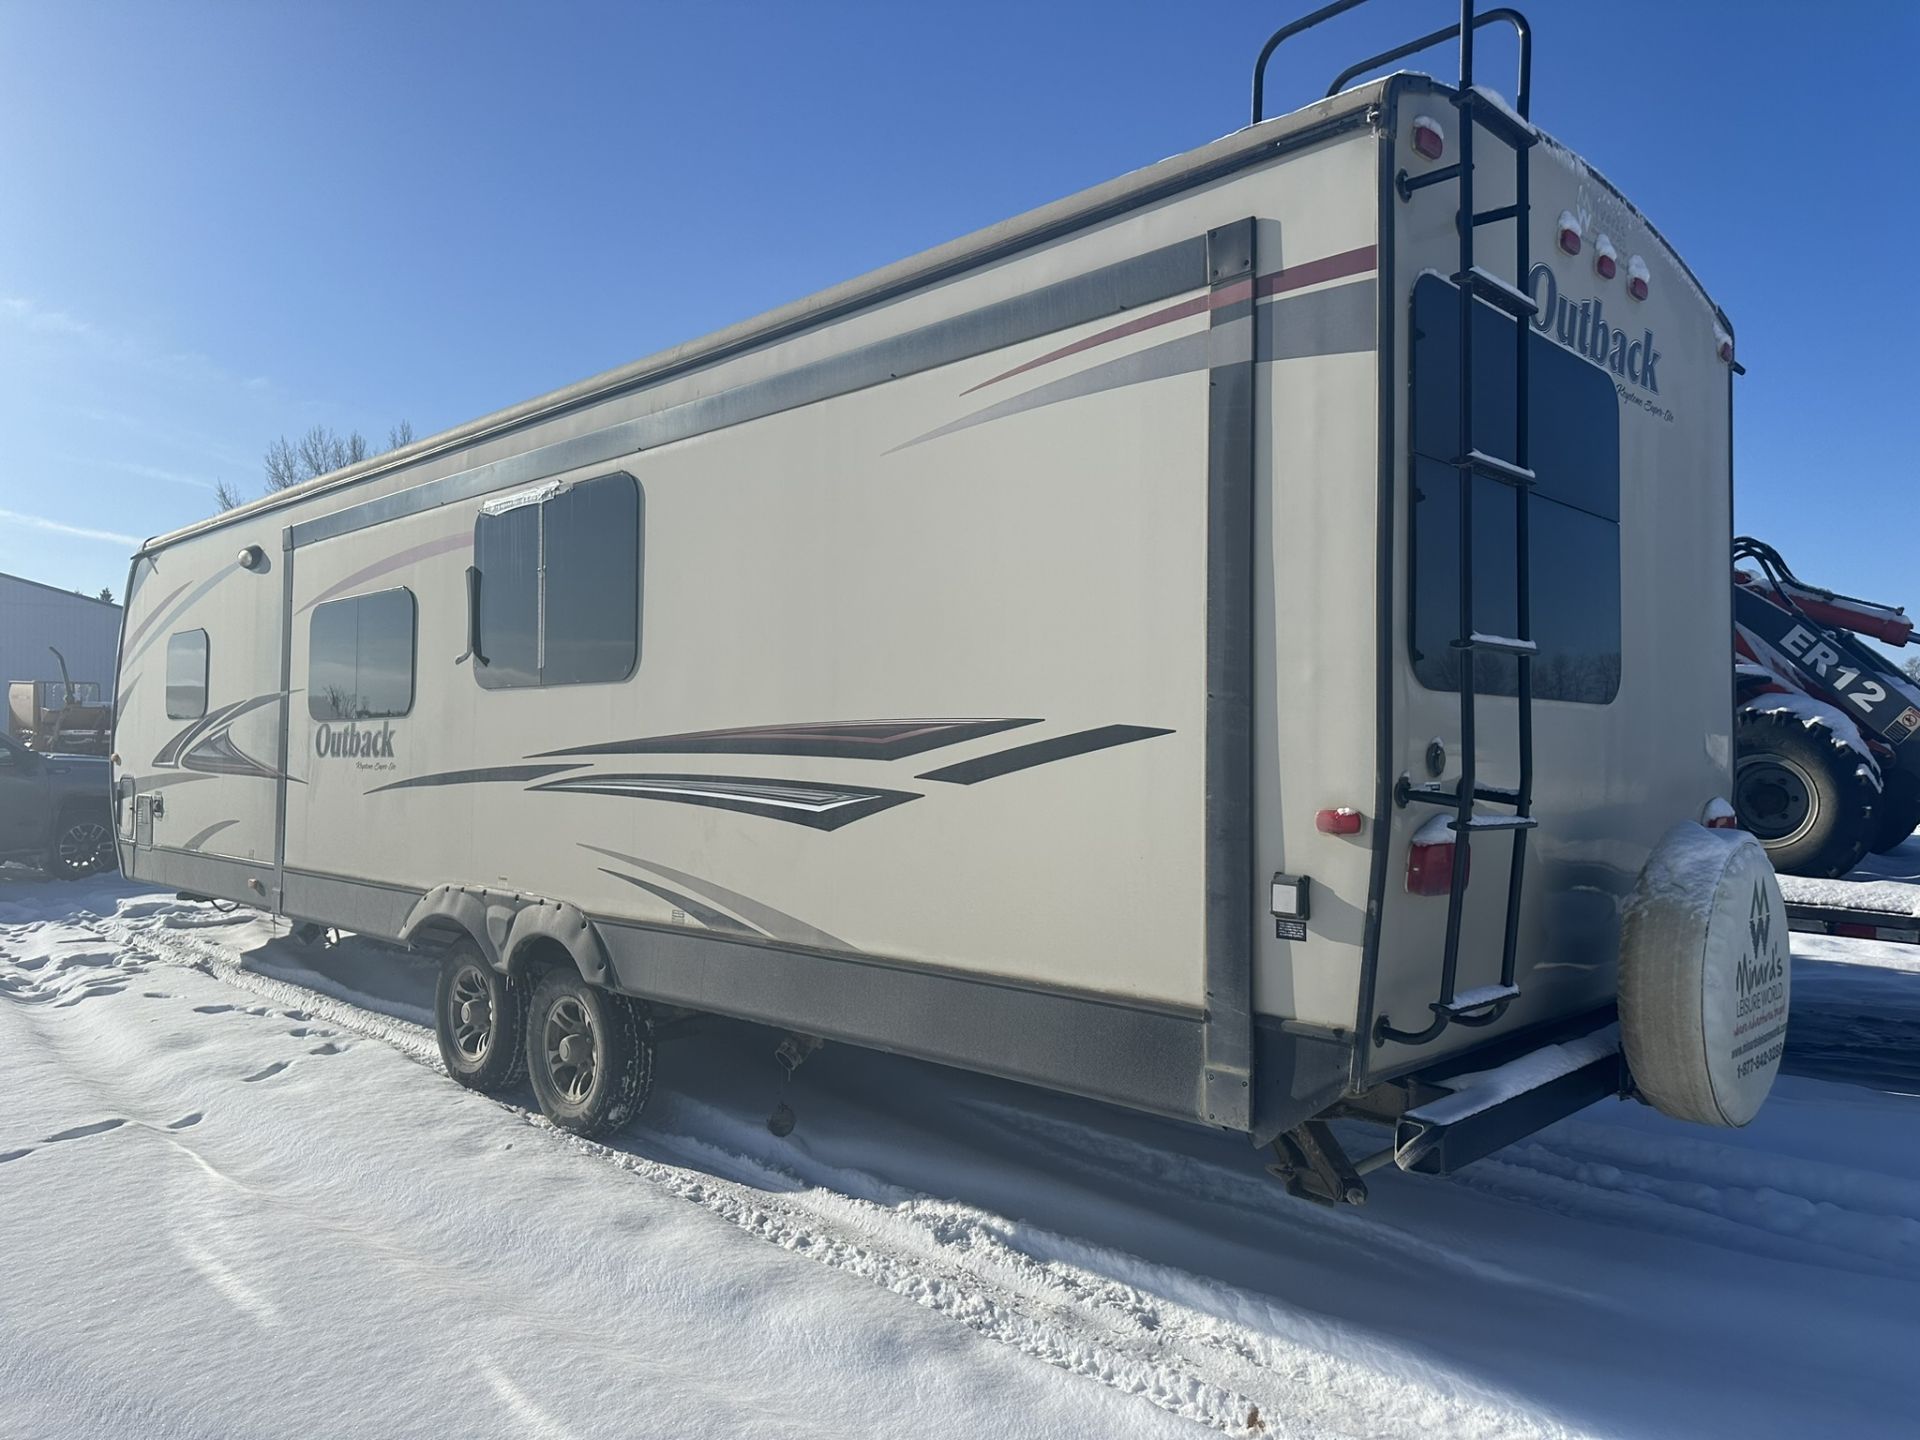 2014 OUTBACK KEYSTONE SUPER-LITE 33 FT HOLIDAY TRAILER, DOUBLE SLIDE, POWER AWNING, OUTDOOR KITCHEN, - Image 14 of 15